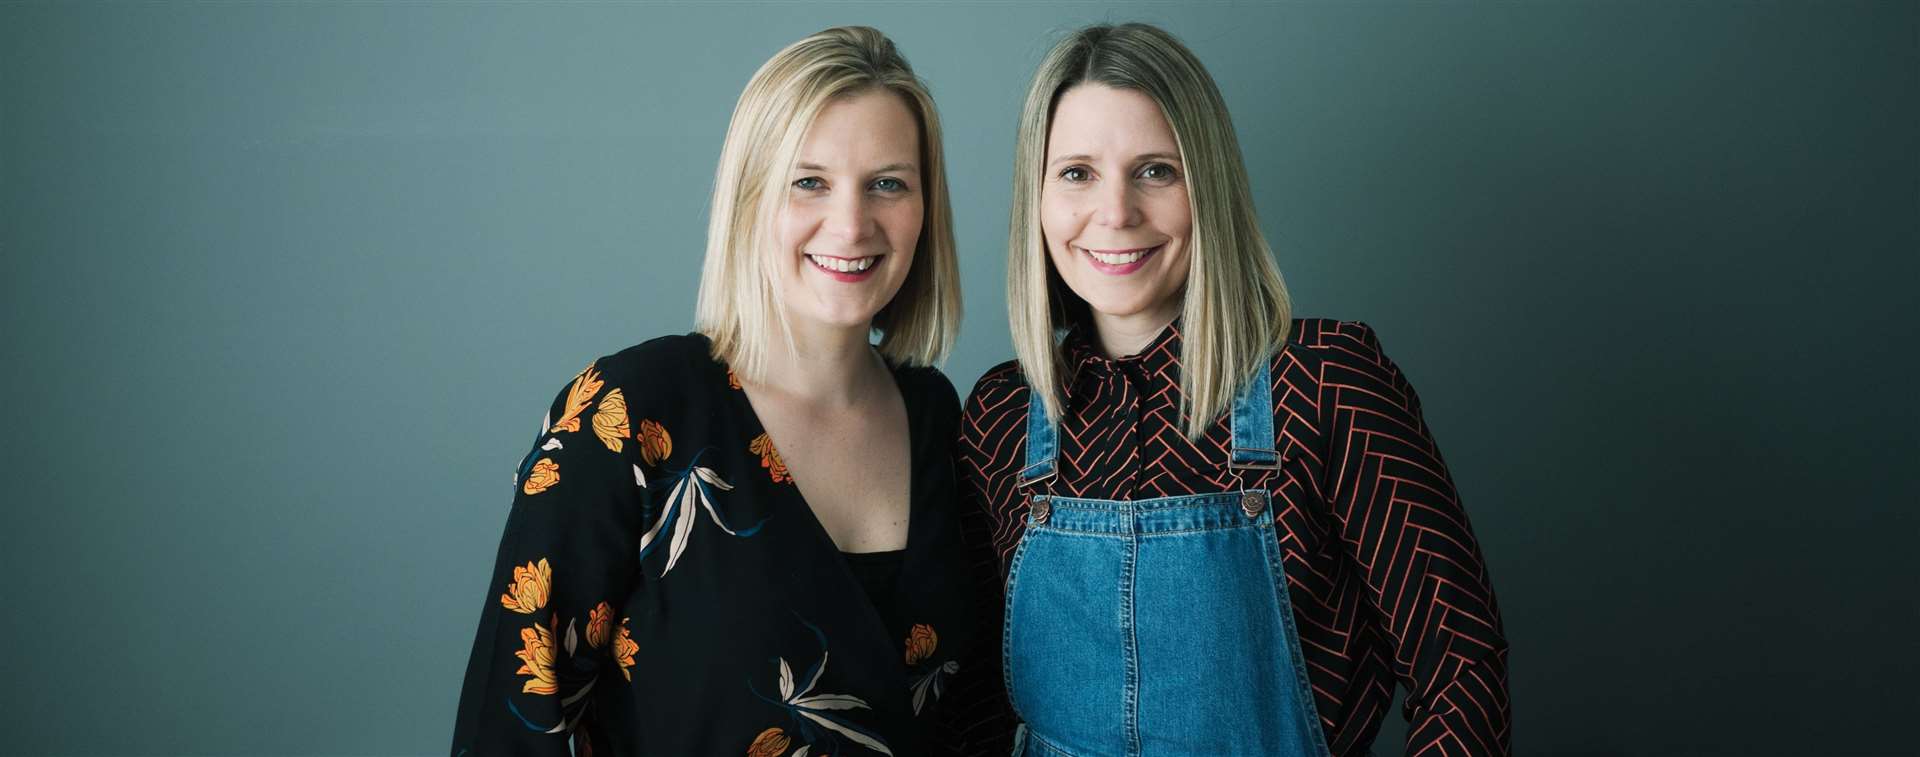 Sisters Laura and Natalie ordinarily would be organising real-life meet-ups for parents and families